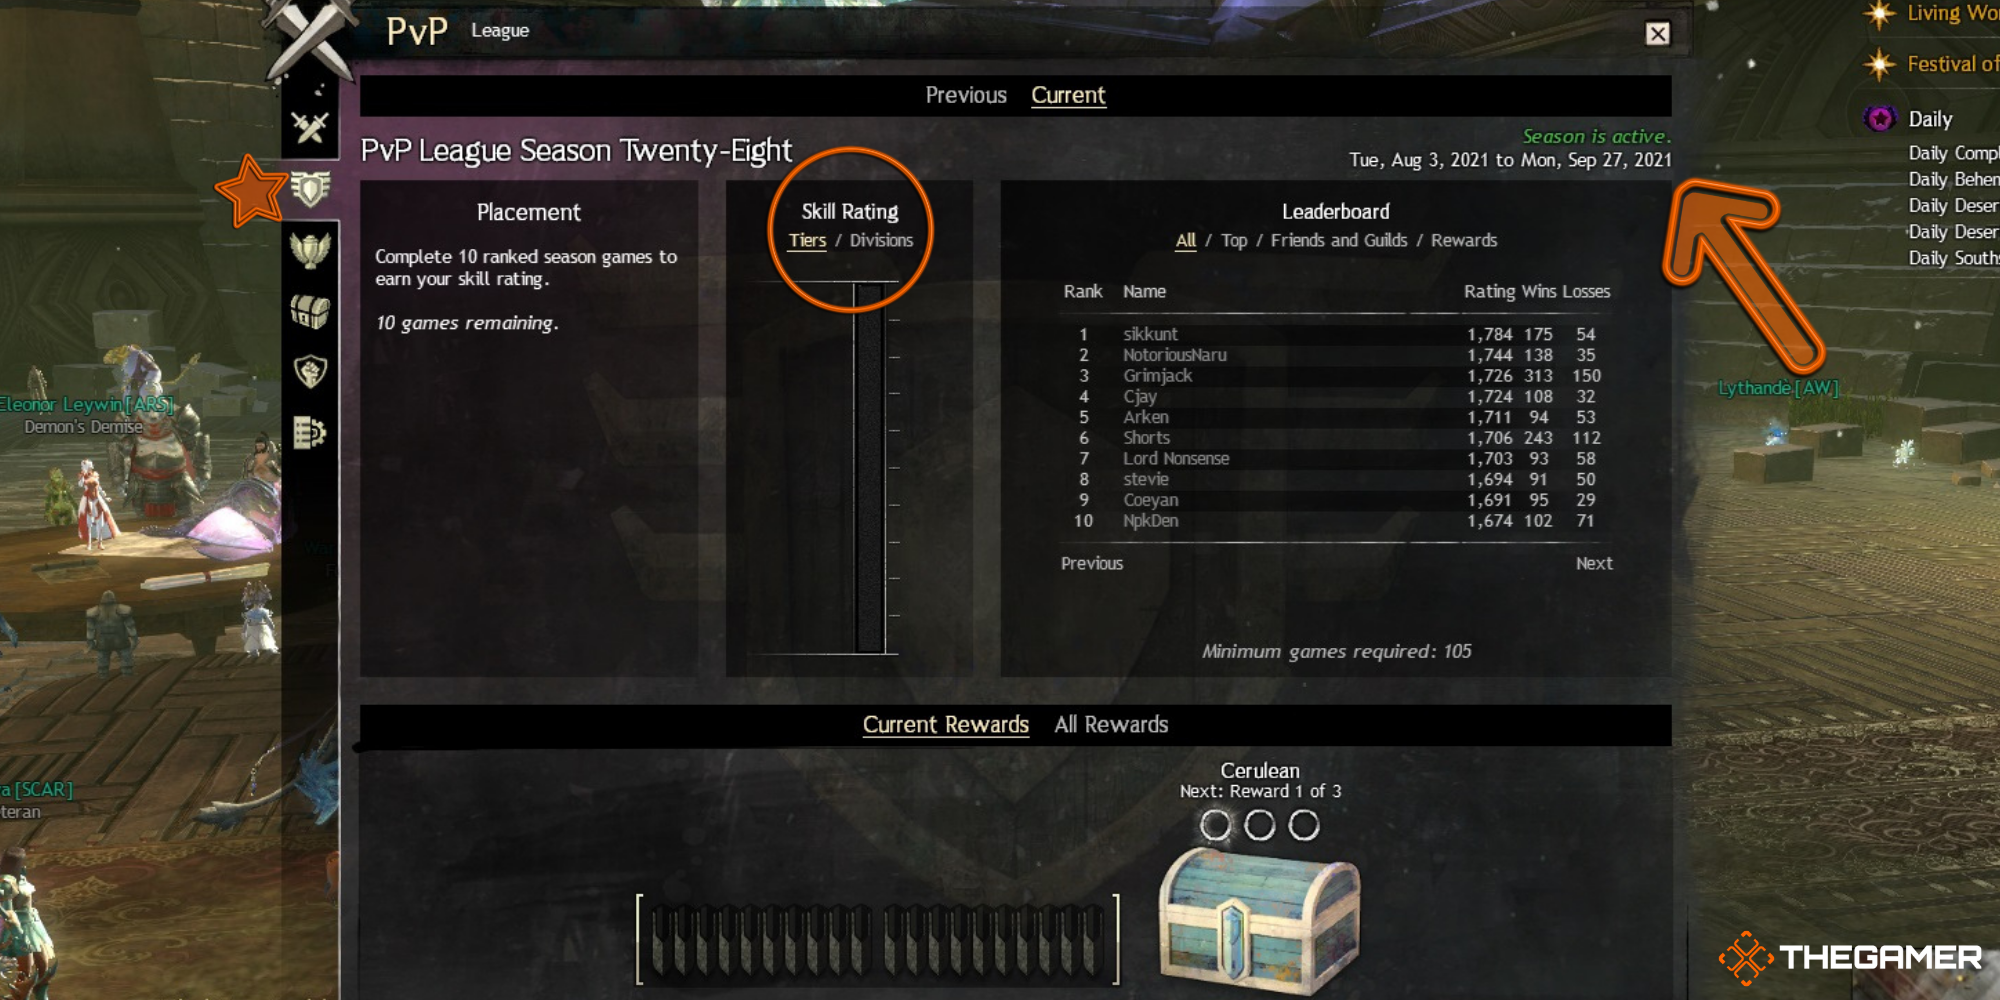 GW2 - Screenshot showing the player the details of the League tab on the PvP menu